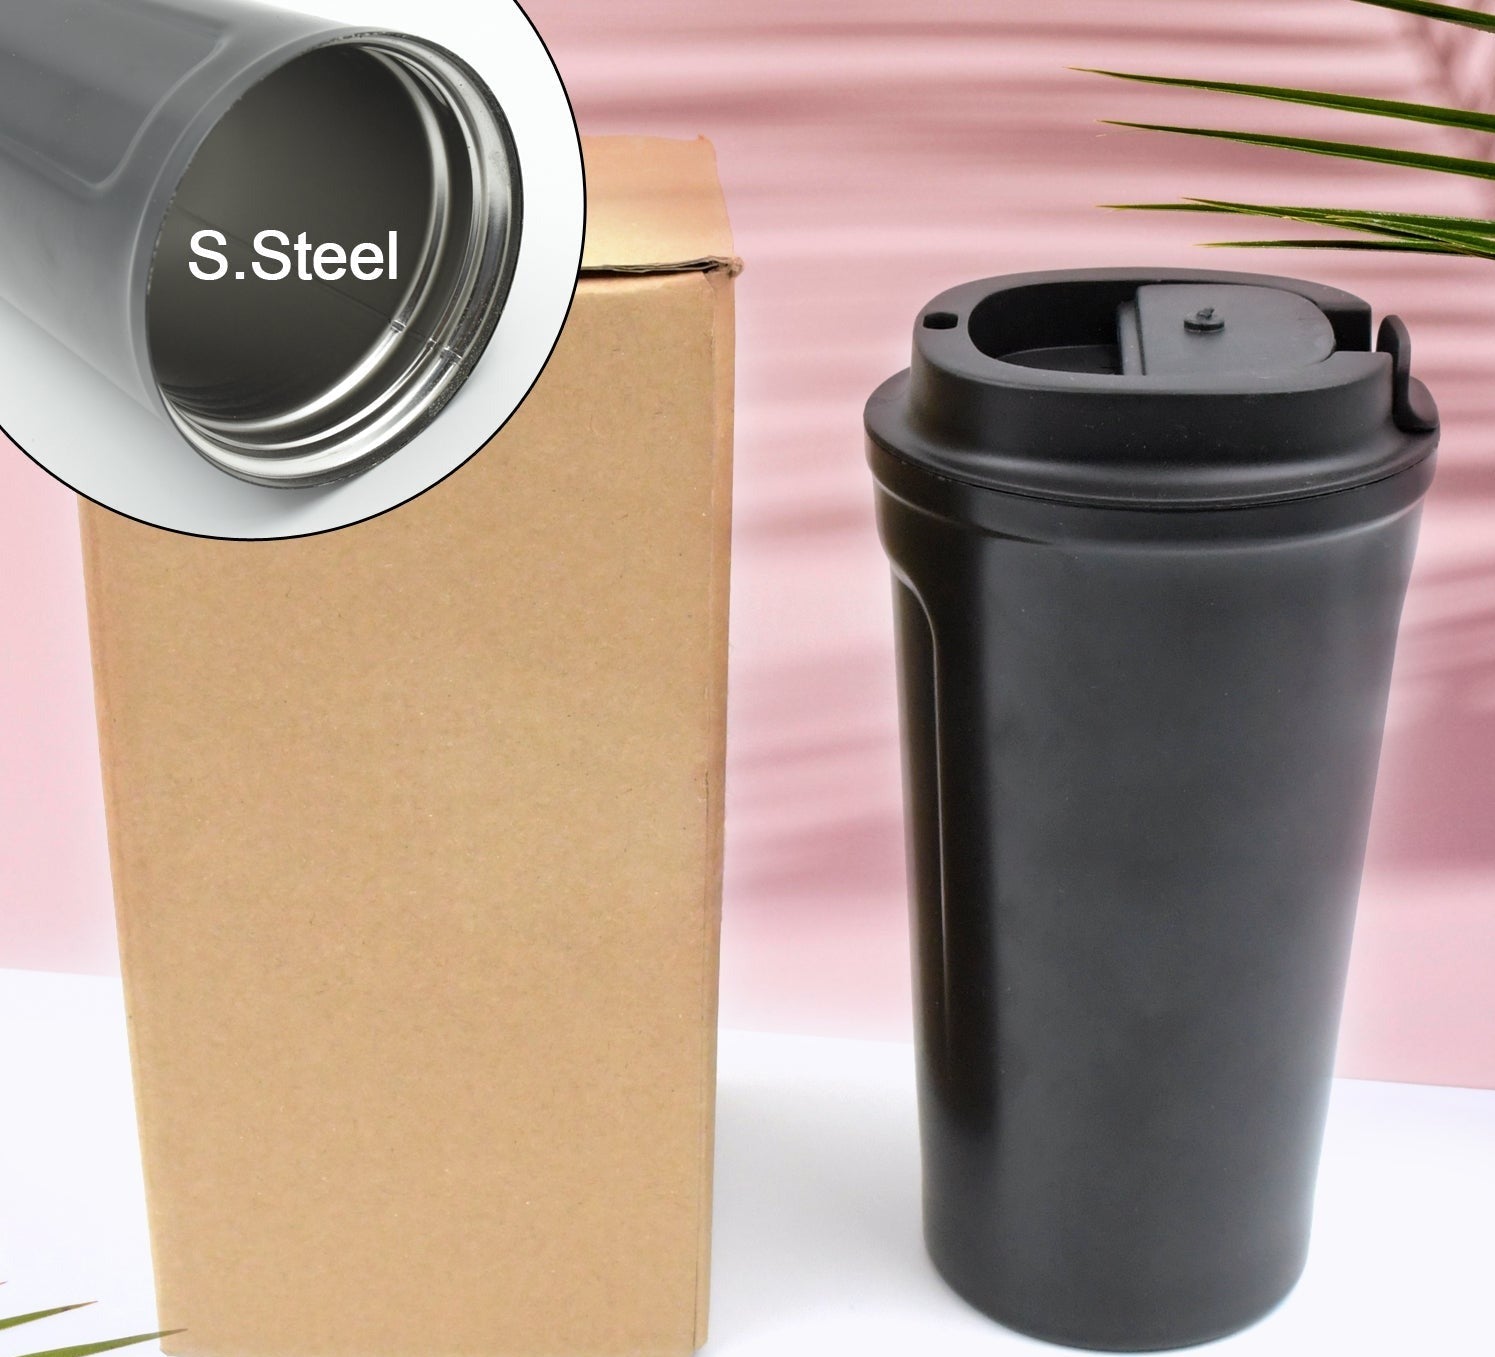 Stainless Steel & Plastic Vacuum Insulated Coffee Cup – Leak-Proof Travel Mug for Hot/Cold Drinks (1 Pc)